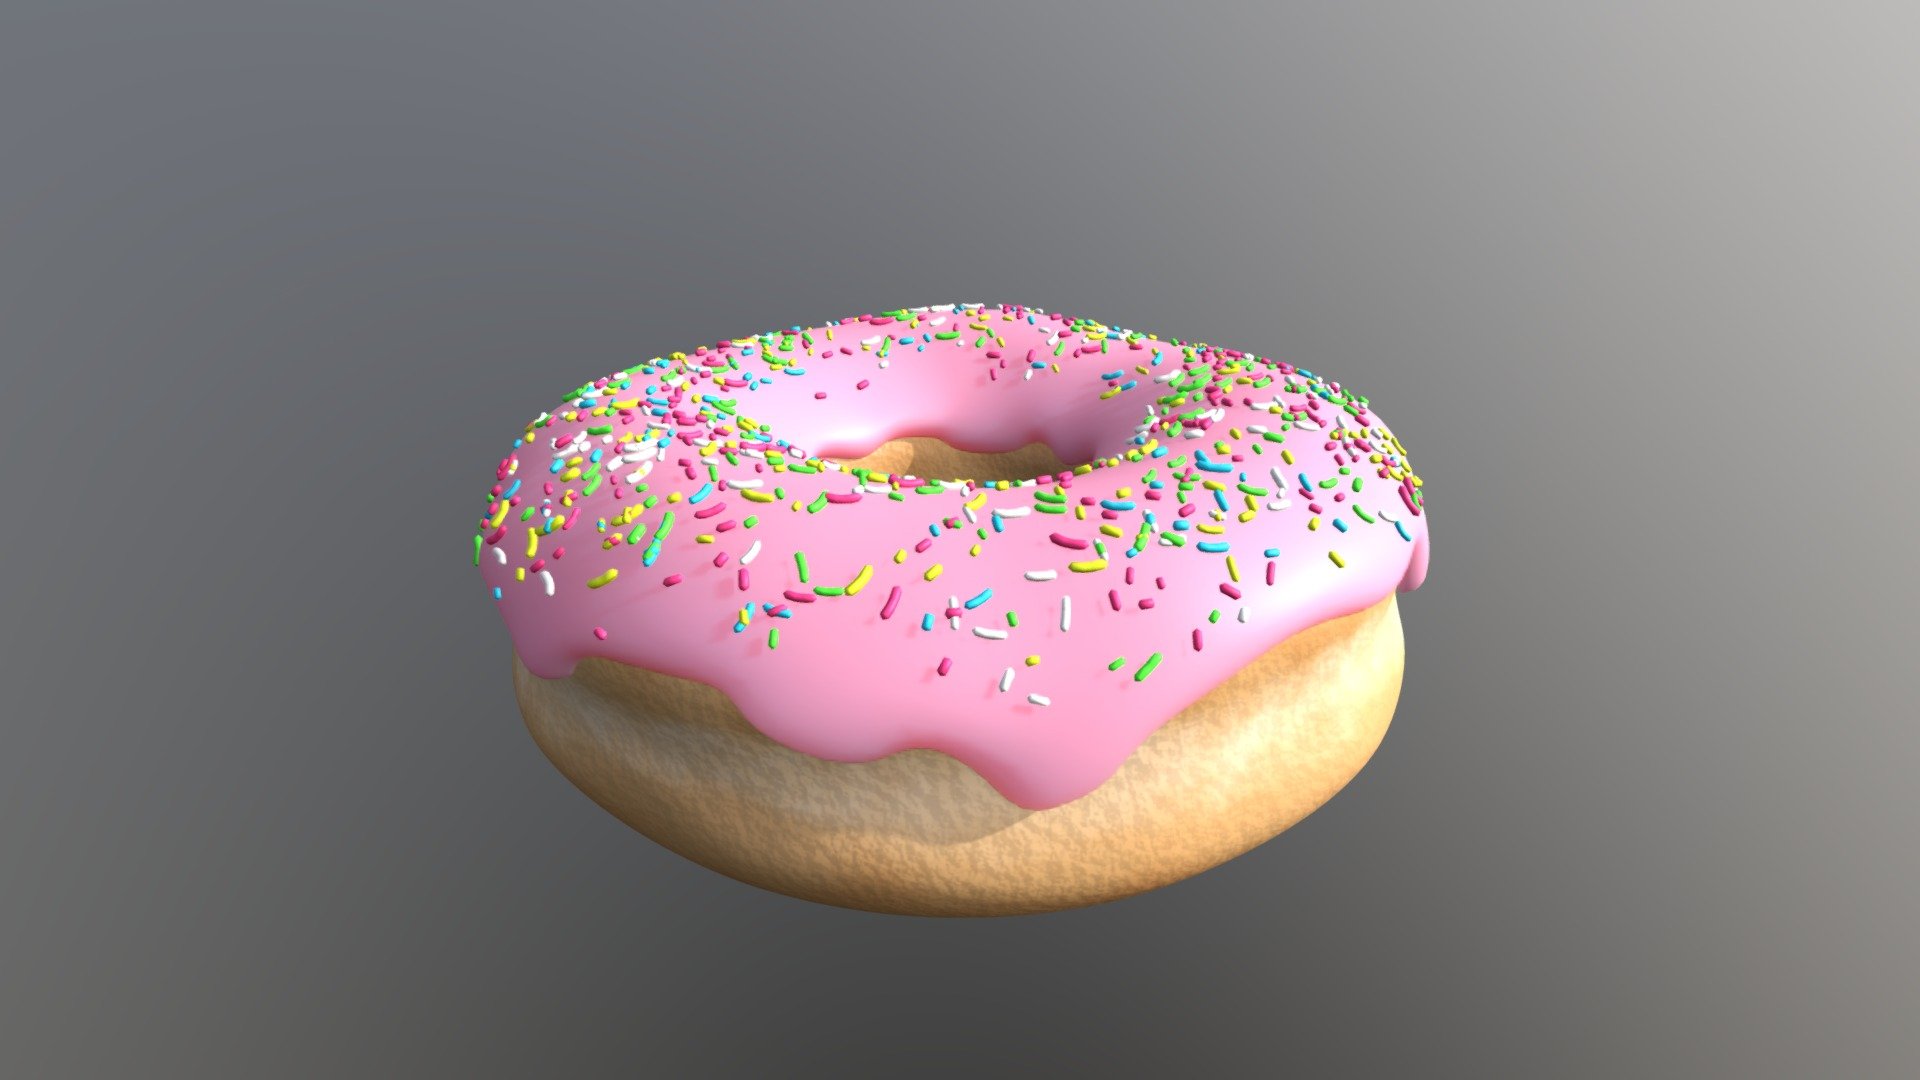 This is my latest donut model following the BlenderGuru beginner tutorial. I may have used some, strange things to the sprinkles but it's better than having to calculate it every single time 3d model